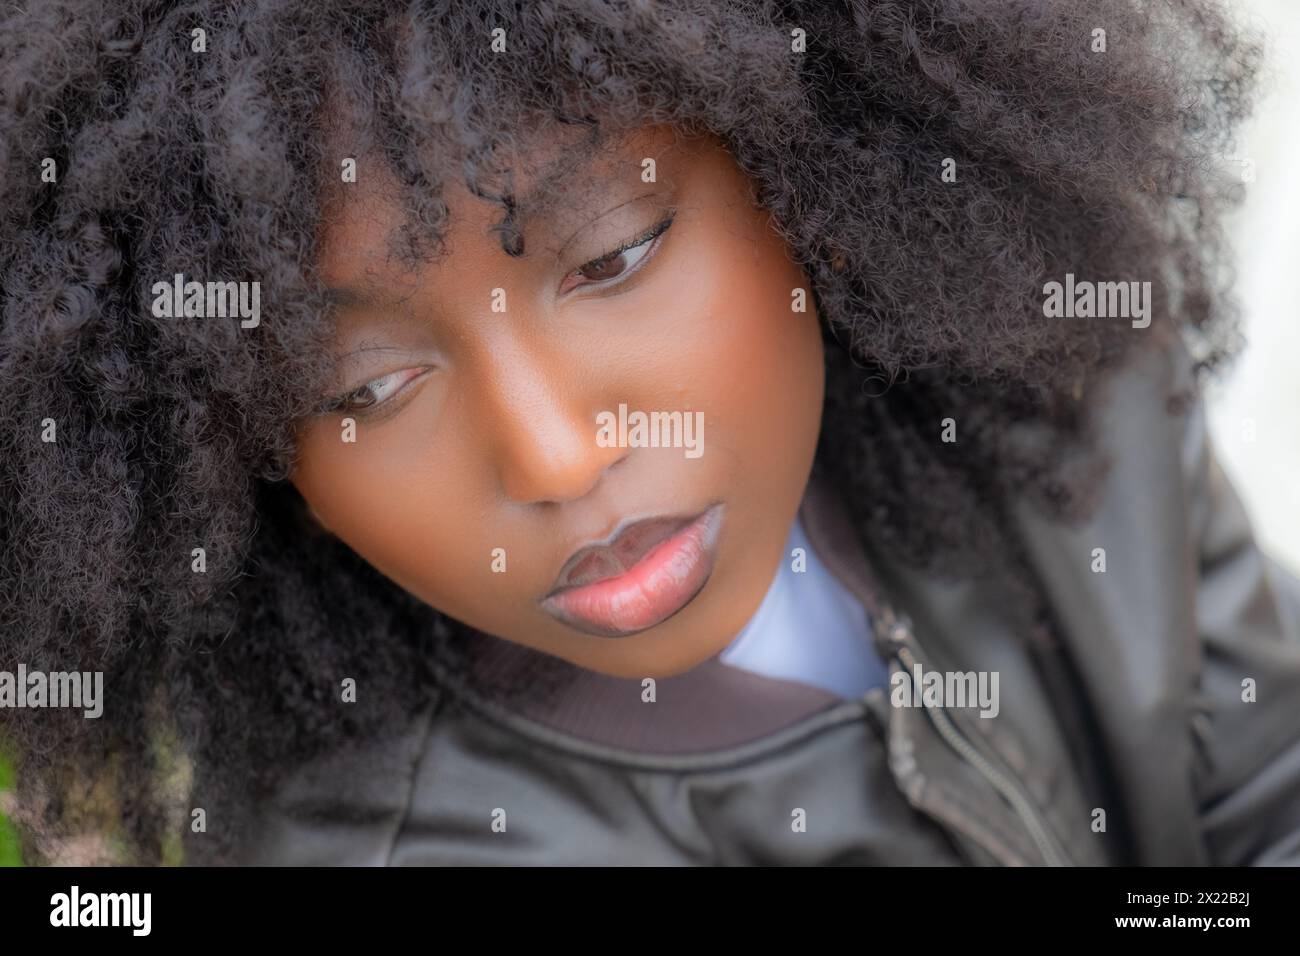 A close-up portrait captures a Black woman with voluminous natural afro hair and a subtle gaze. The soft focus on her features contrasts with her piercing eyes, expressing introspection. She's wearing a classic leather jacket, hinting at a cool, urban style. Close-Up of Contemplative Black Woman with Natural Hair. High quality photo Stock Photo